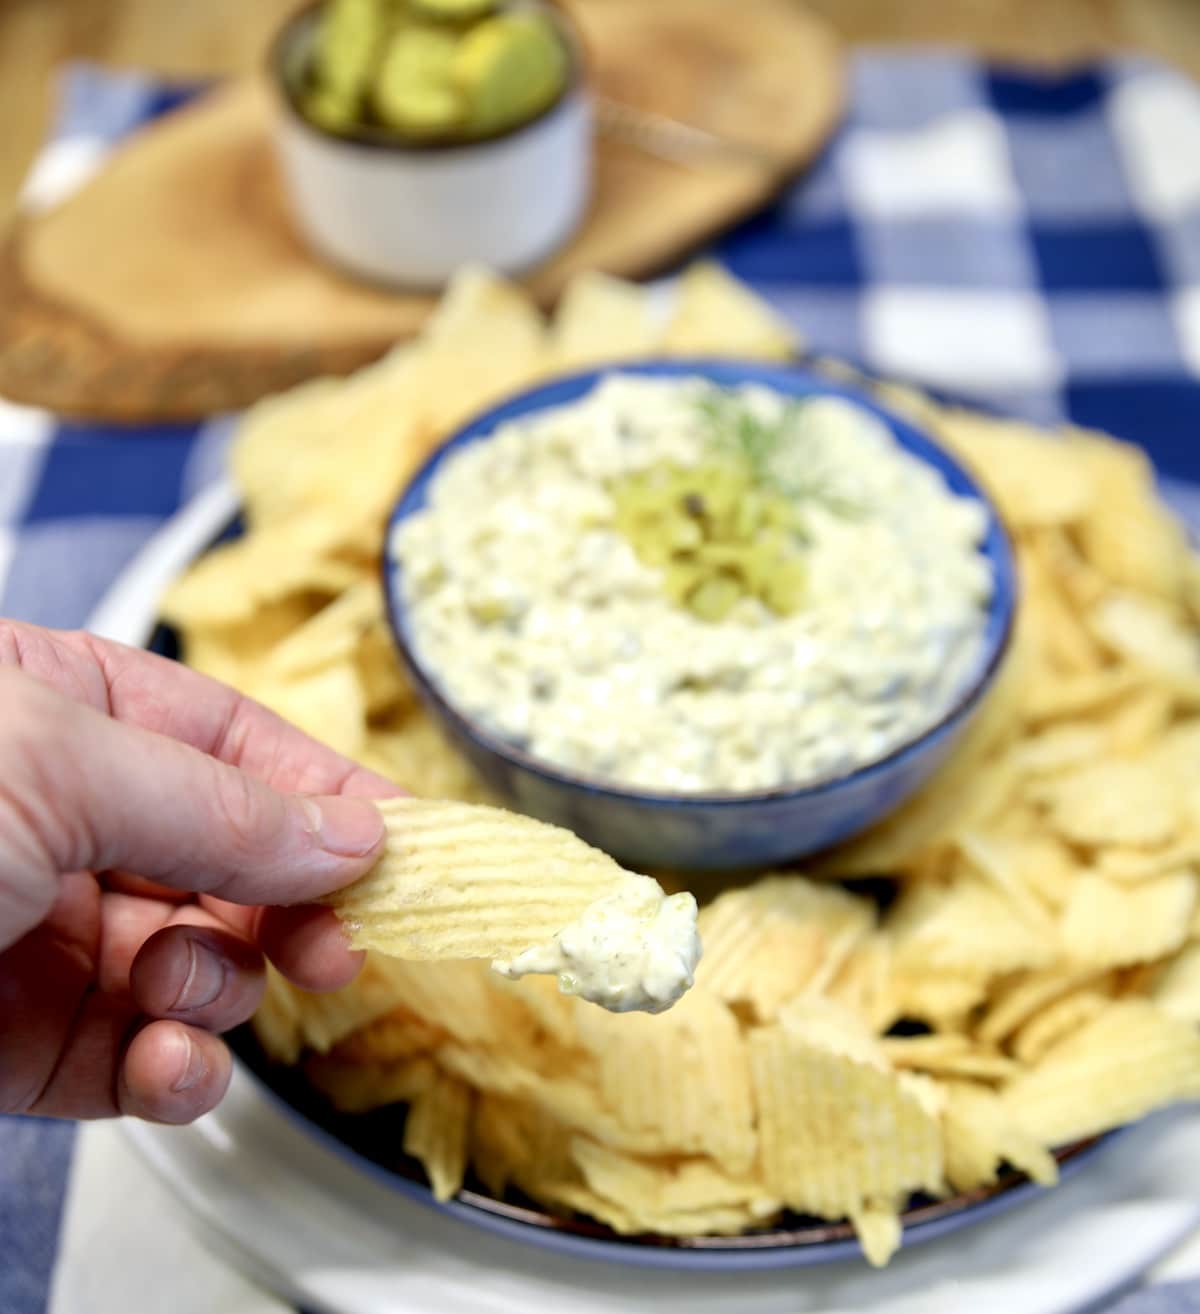 Creamy dip with pickles dipping with potato chips.